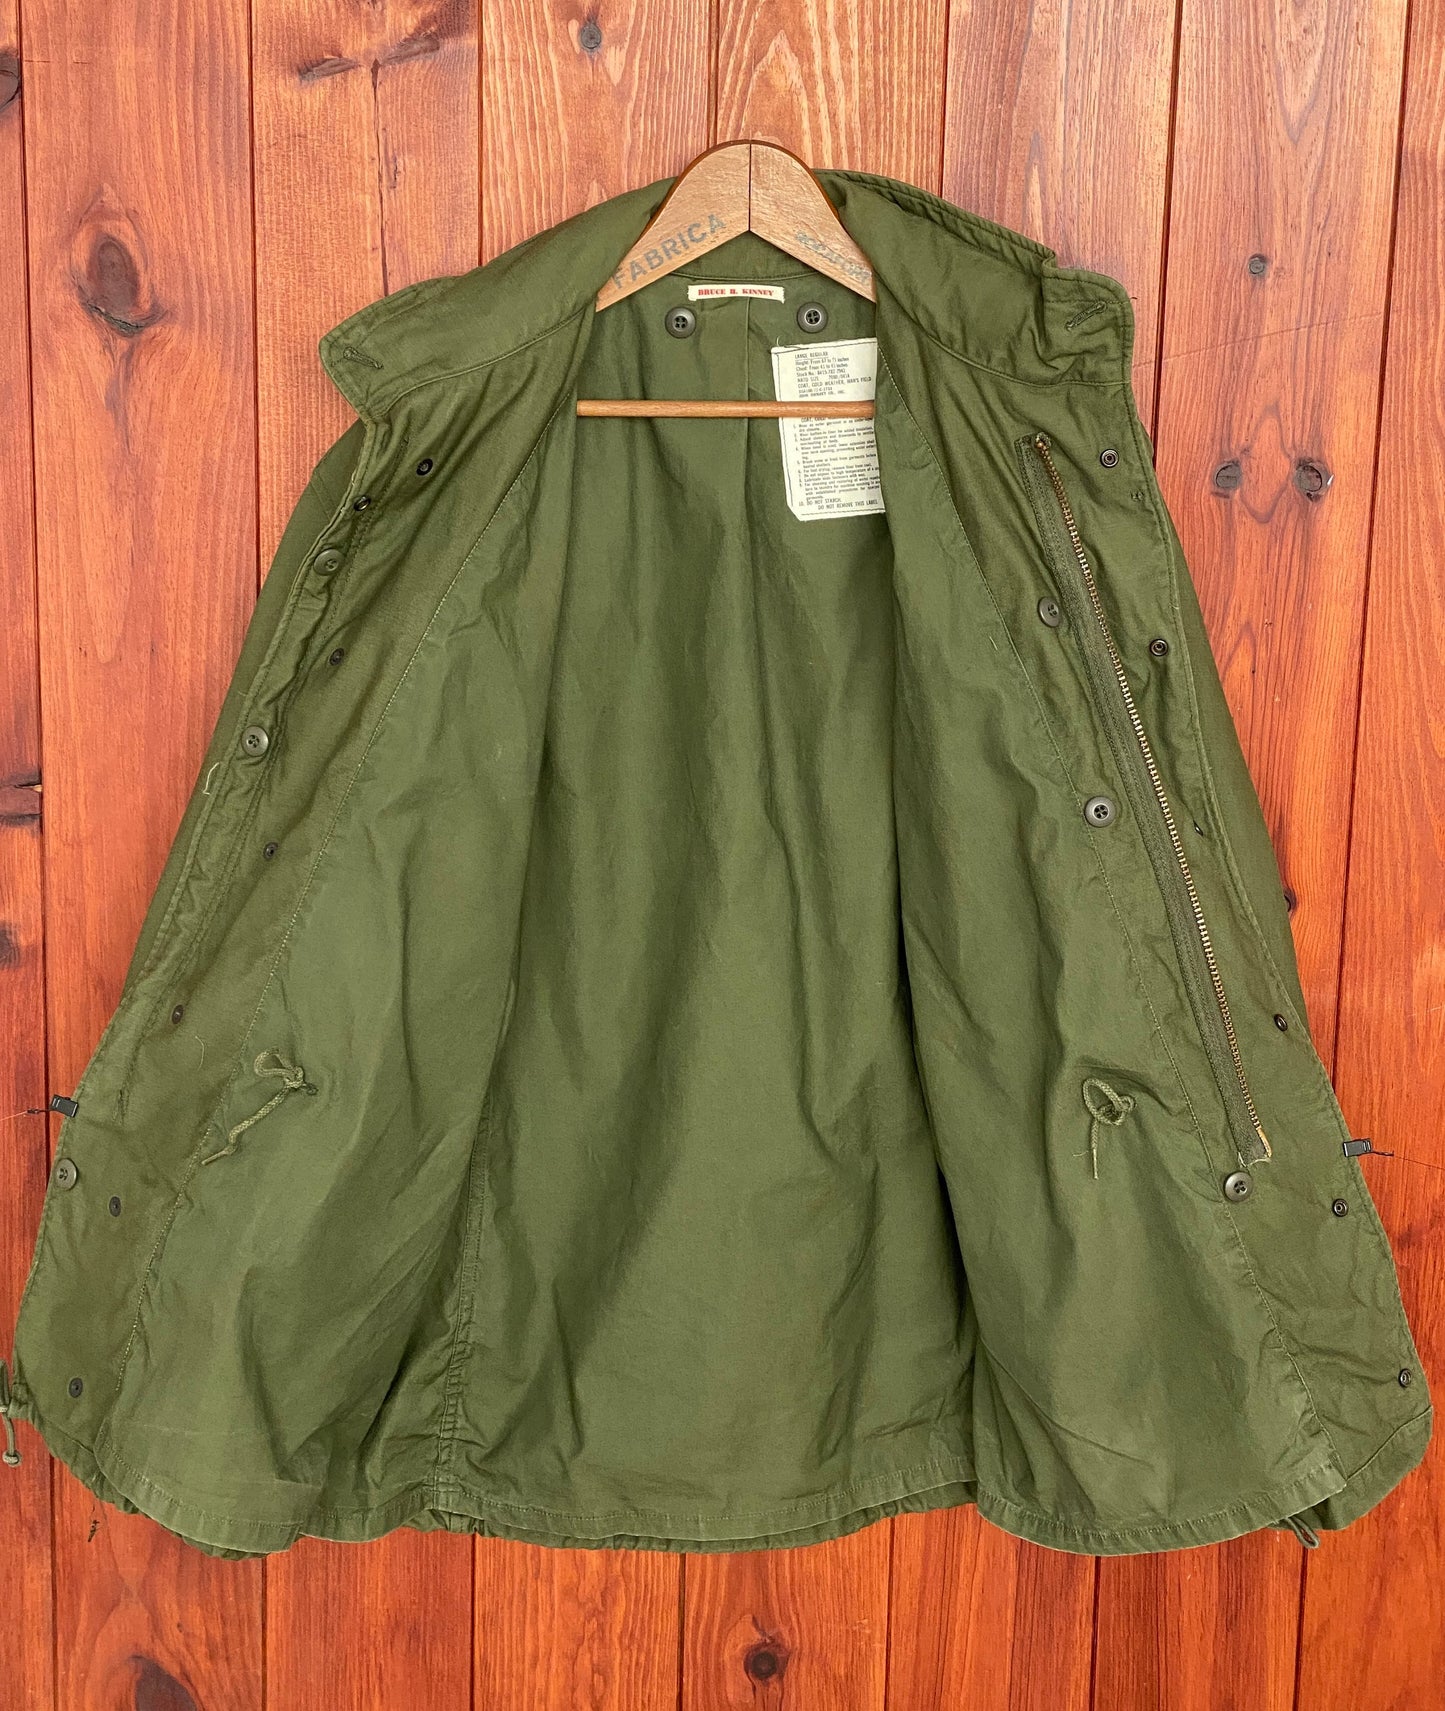 Authentic 1972 Vietnam Era US Navy Seabee Vintage M-65 Field Jacket: Classic Military Apparel with Rich History.